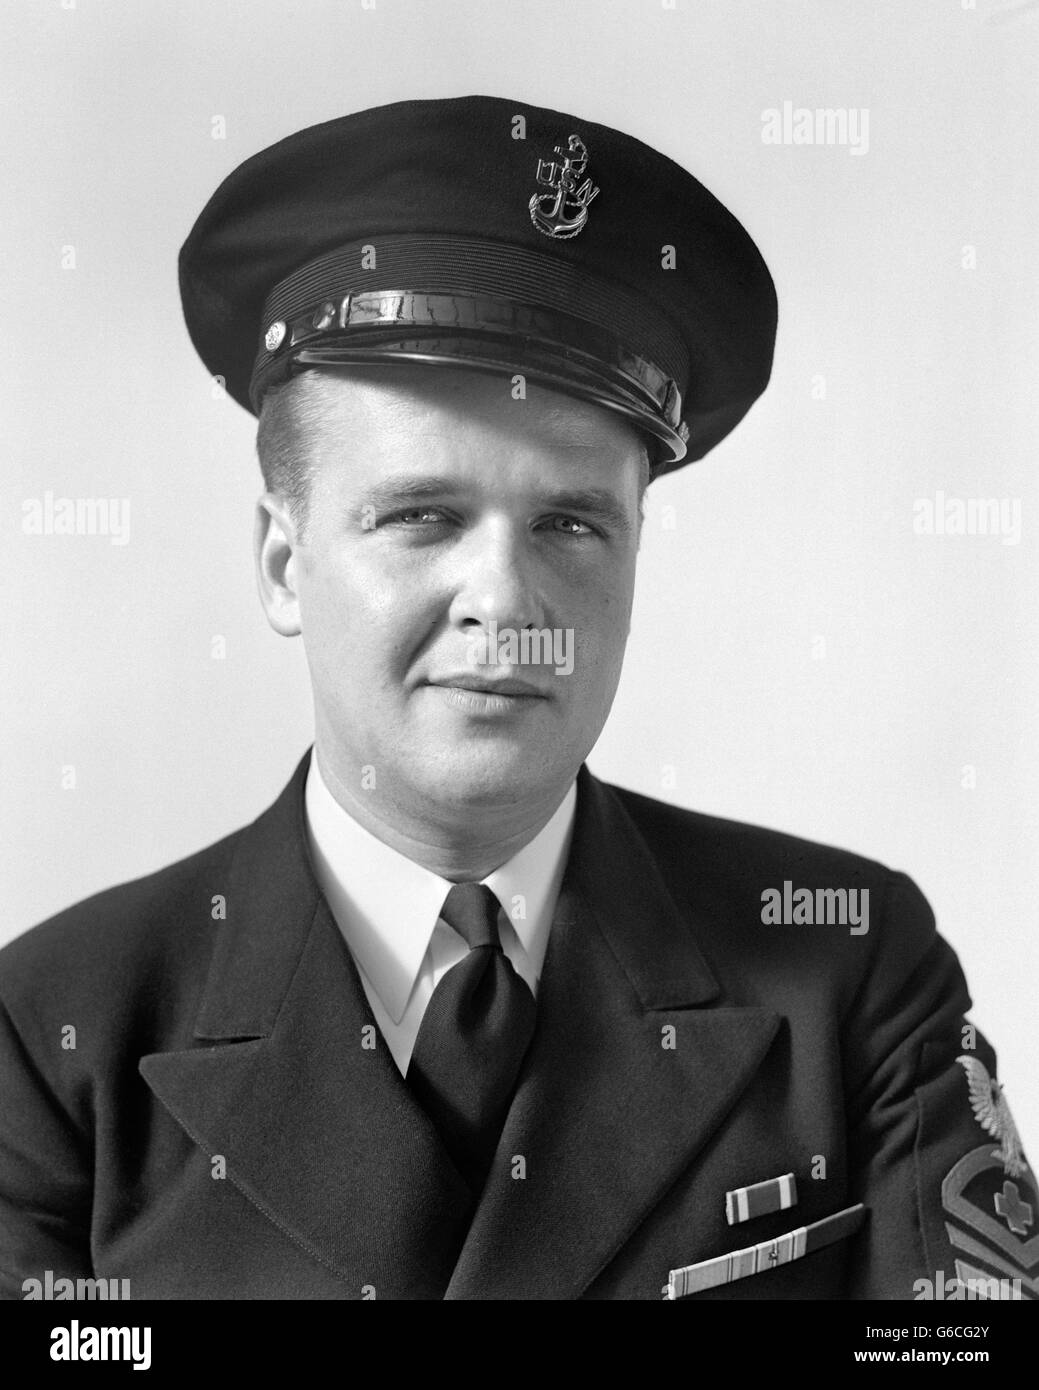 1940s PORTRAIT MAN VETERAN NAVY CHIEF PETTY OFFICER IN UNIFORM AND HAT LOOKING AT CAMERA Stock Photo